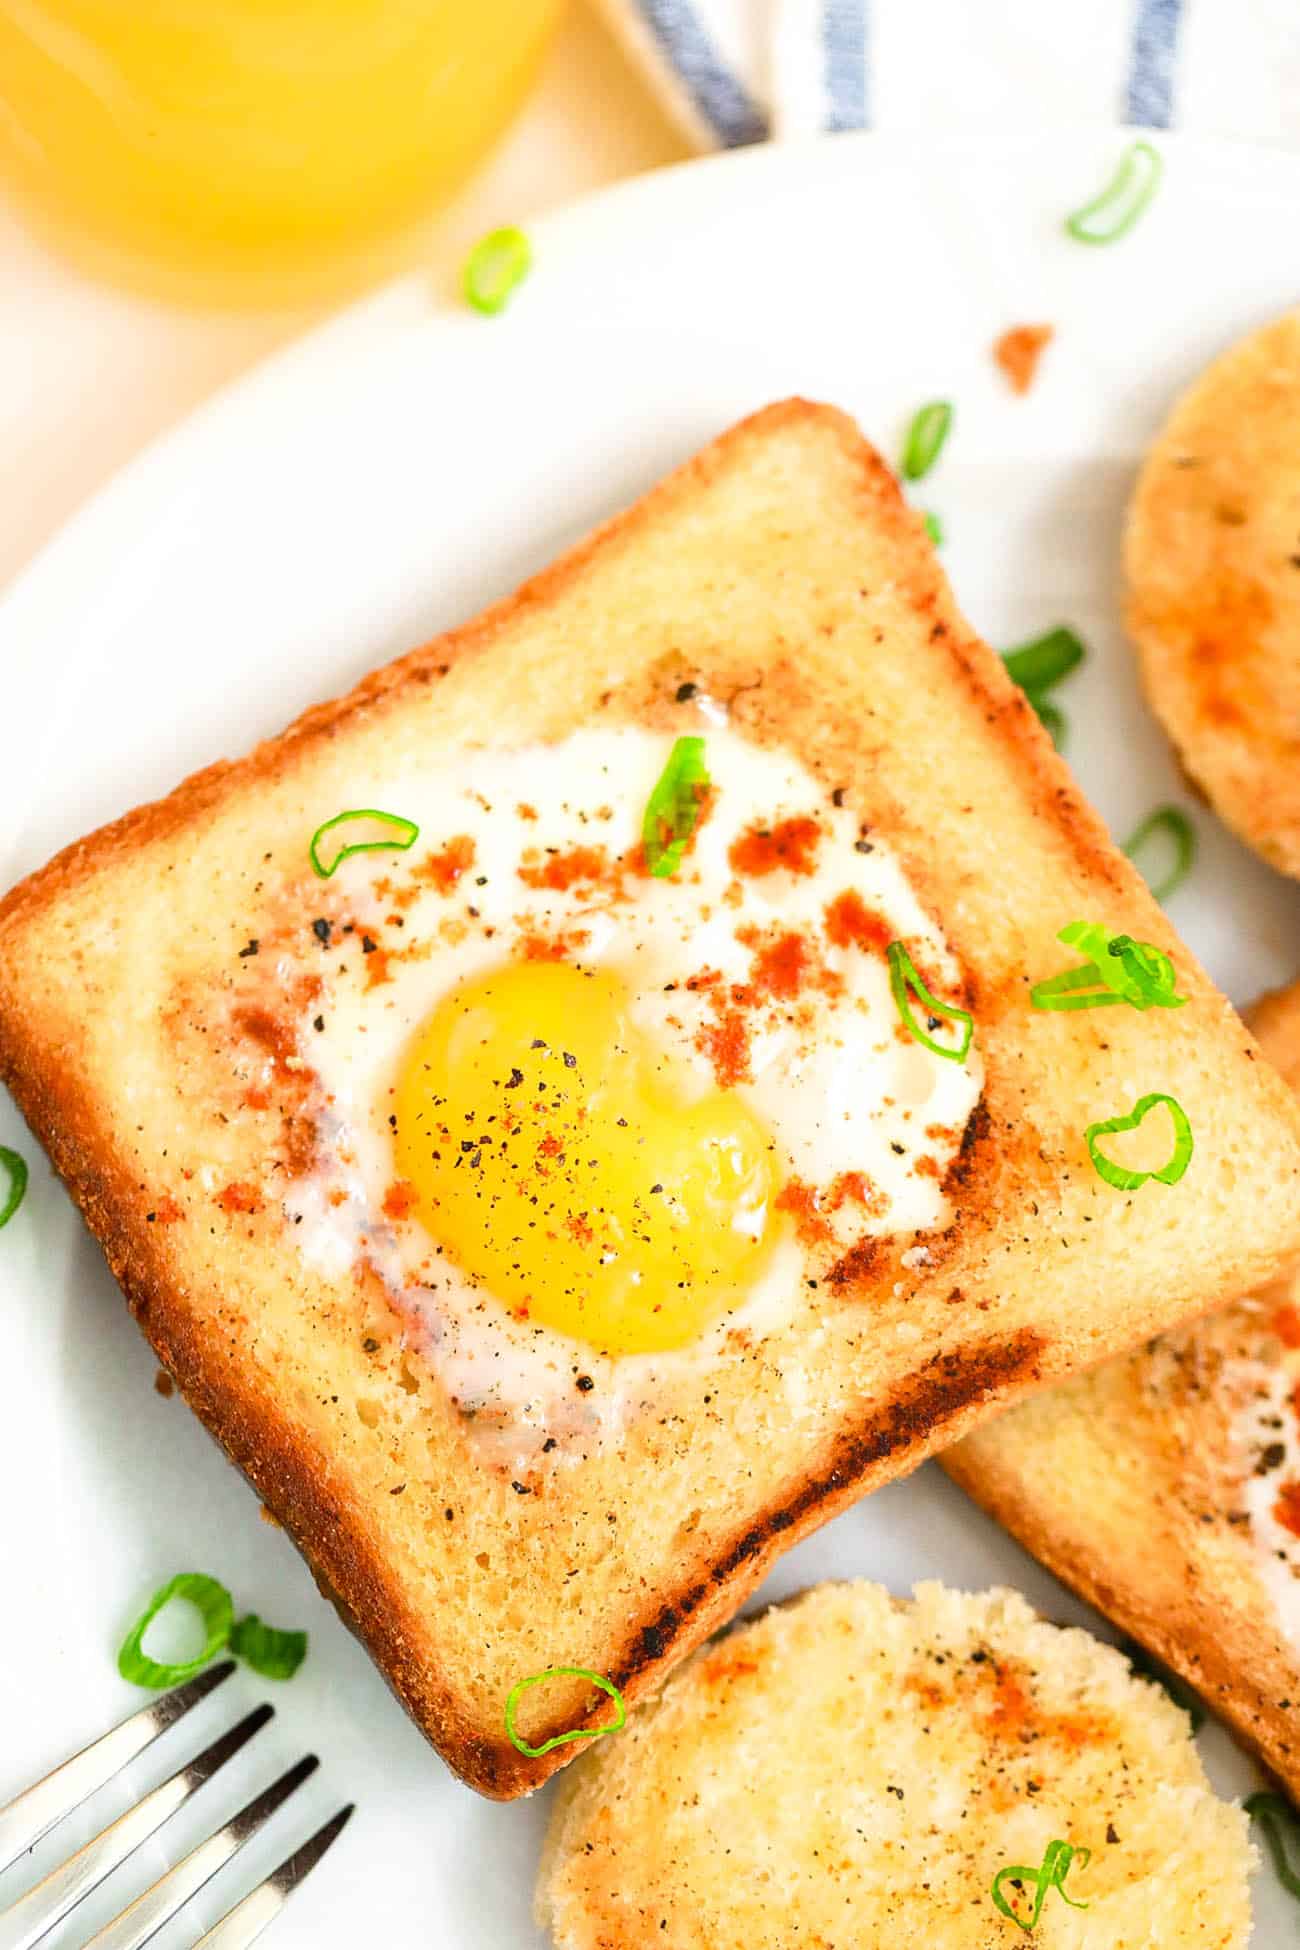 eggs in a basket - a classic breakfast served on a white plate